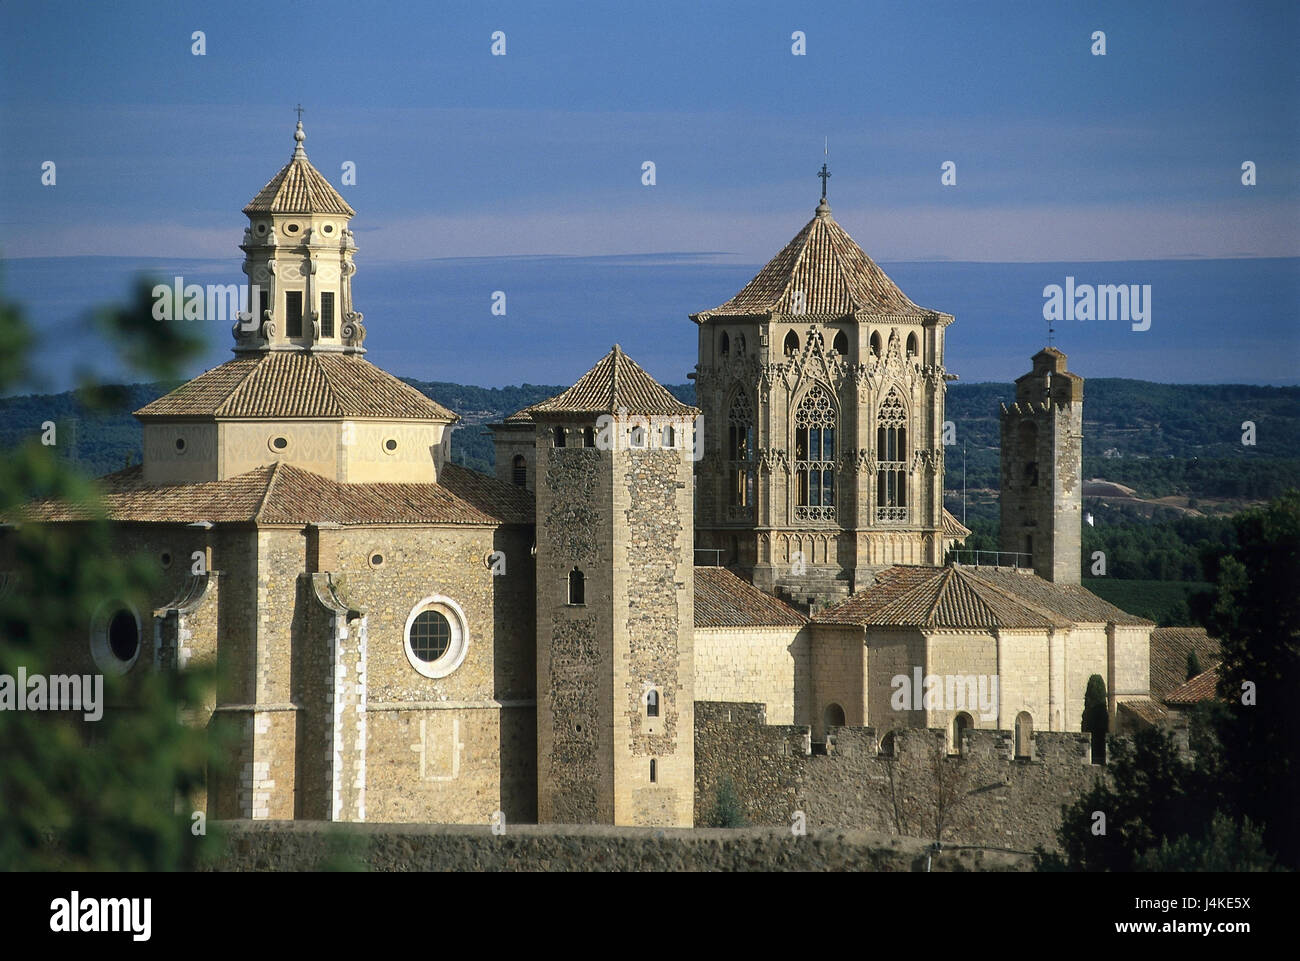 Spain, Catalonia, Monasterio Santa Maria de Poblet, view Europe, Cistercian monastery, cloister, structure, king's cloister, architectural style, architecture, culture, place of interest, UNESCO-world cultural heritage Stock Photo